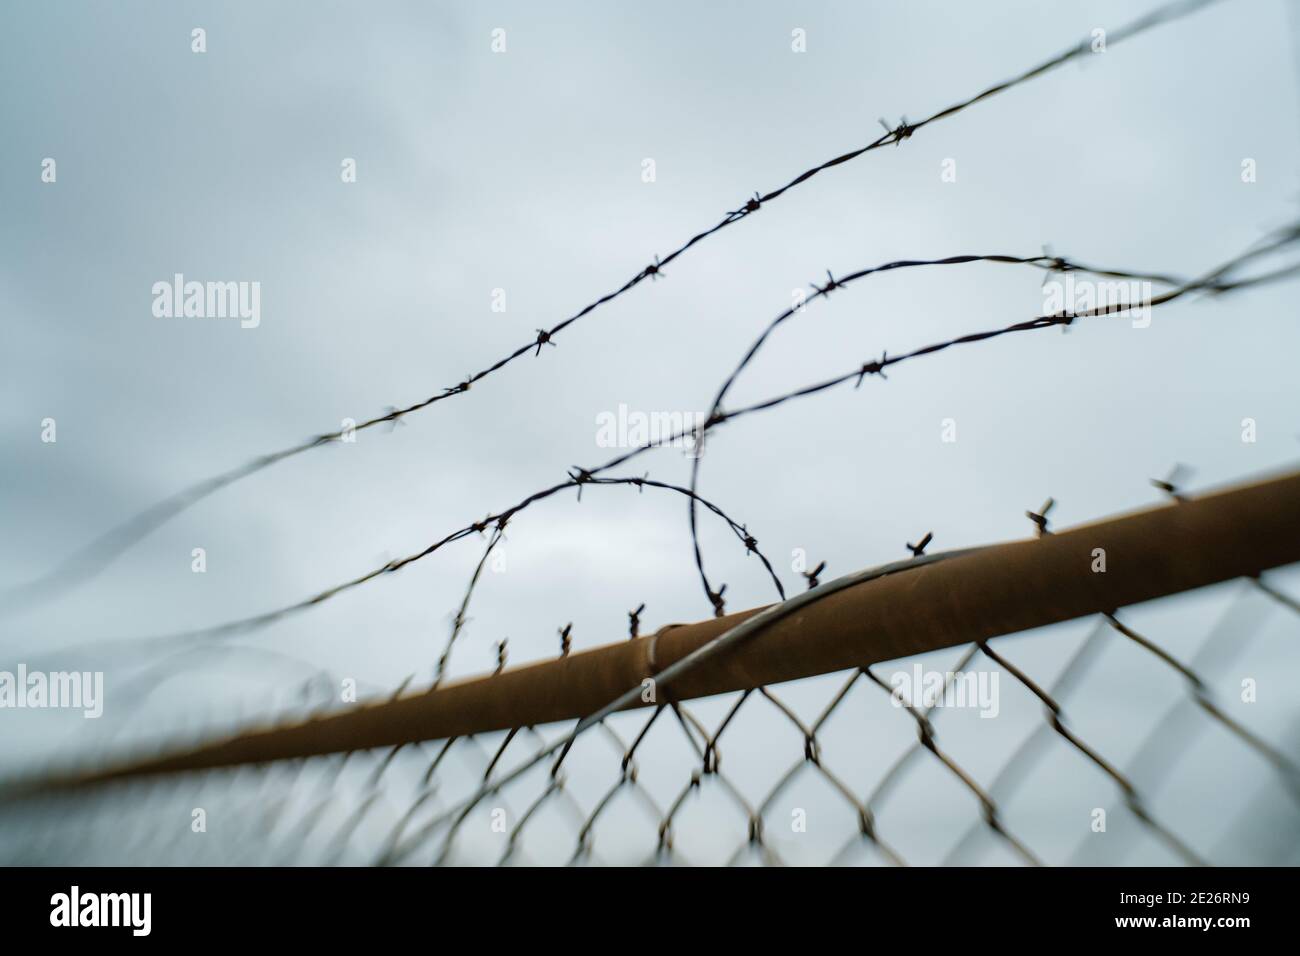 Chain link barbed wire fence close up Stock Photo